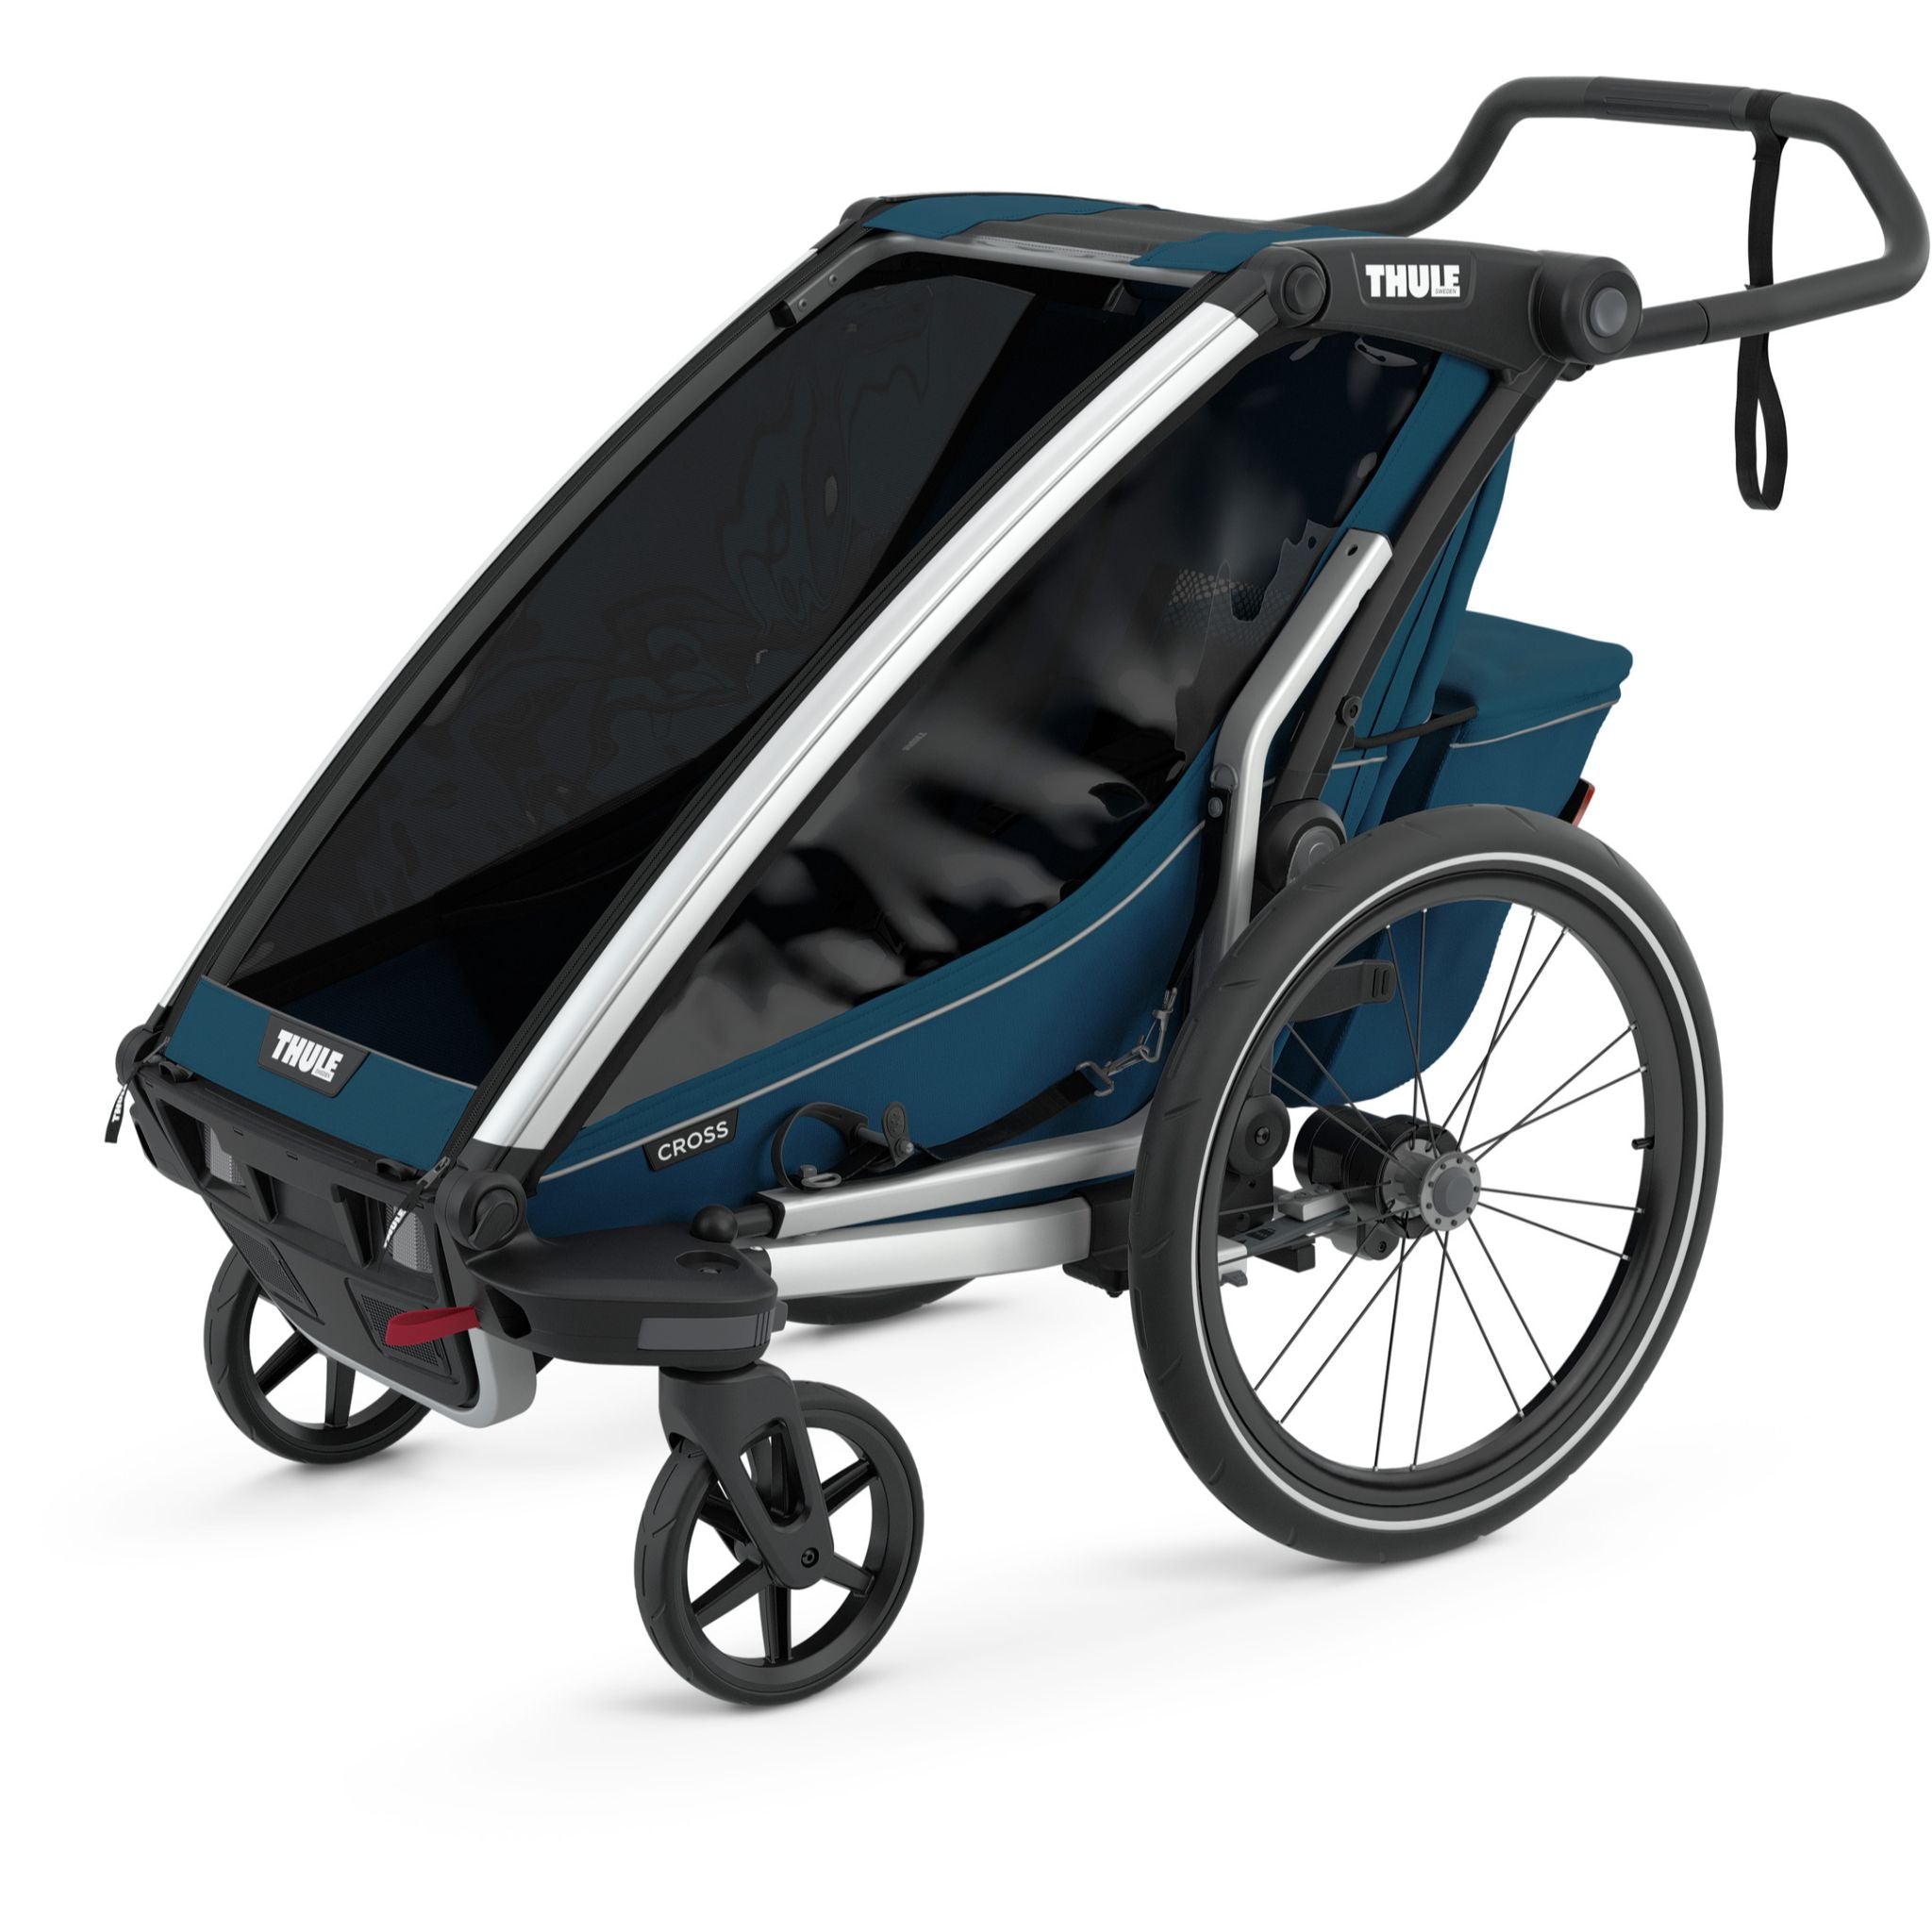 Thule Chariot Cross 1 Child Carrier with Cycling and Strolling kit